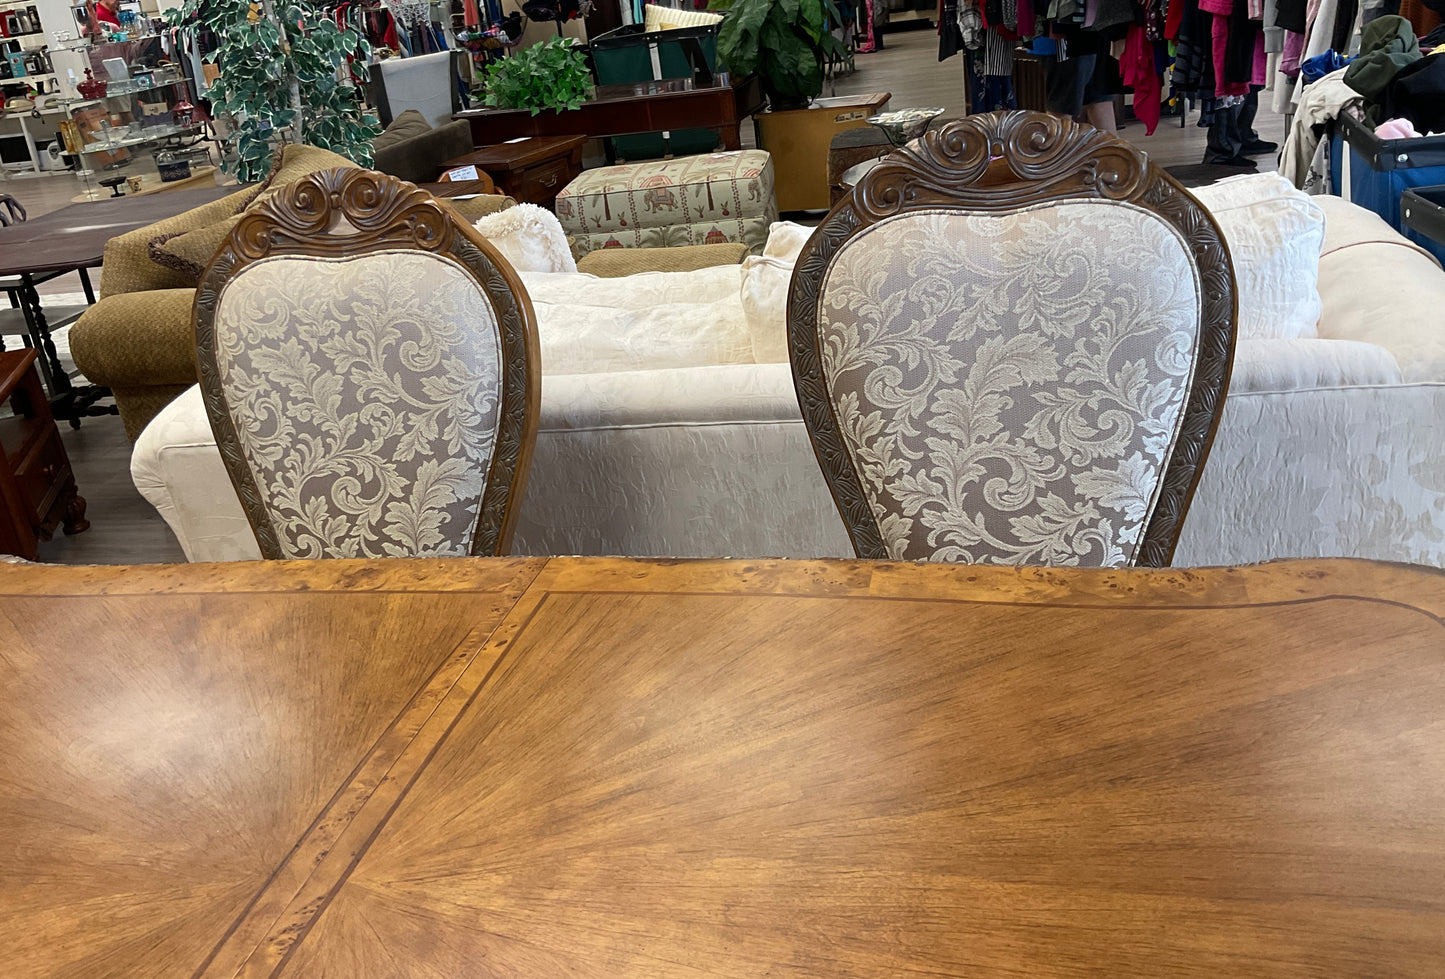 Gorgeous Michael Amini Amaretto Paradisio Dining Table With 6 Chairs